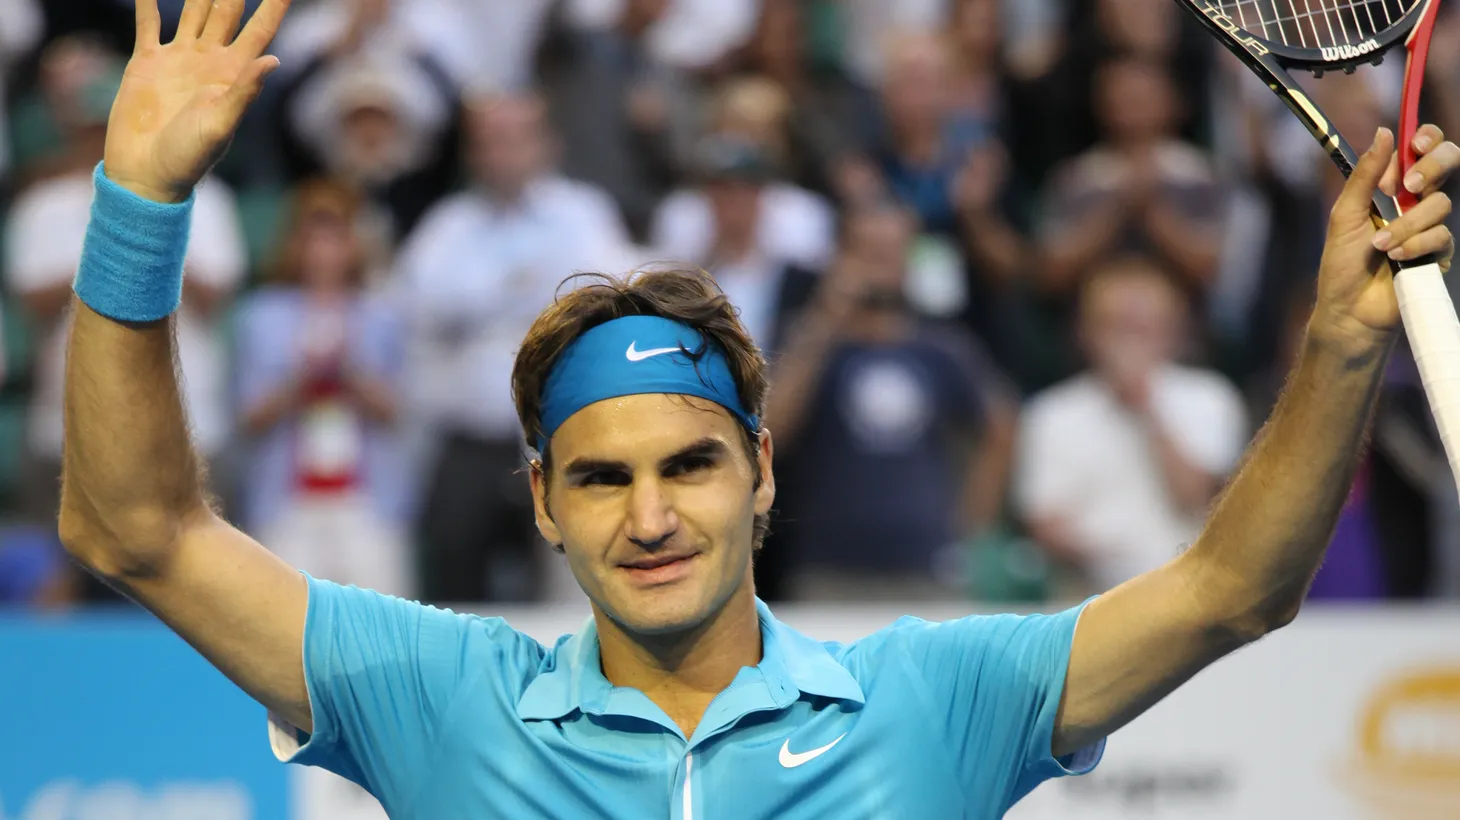 Roger Federer waves to the crowd after a win in the 2010 Australian Open. “He so enjoyed playing tennis, and came to terms with that period when he was not winning any grand slams,” says writer Geoff Dyer. “And so why should he stop doing this thing that he liked doing so much?”